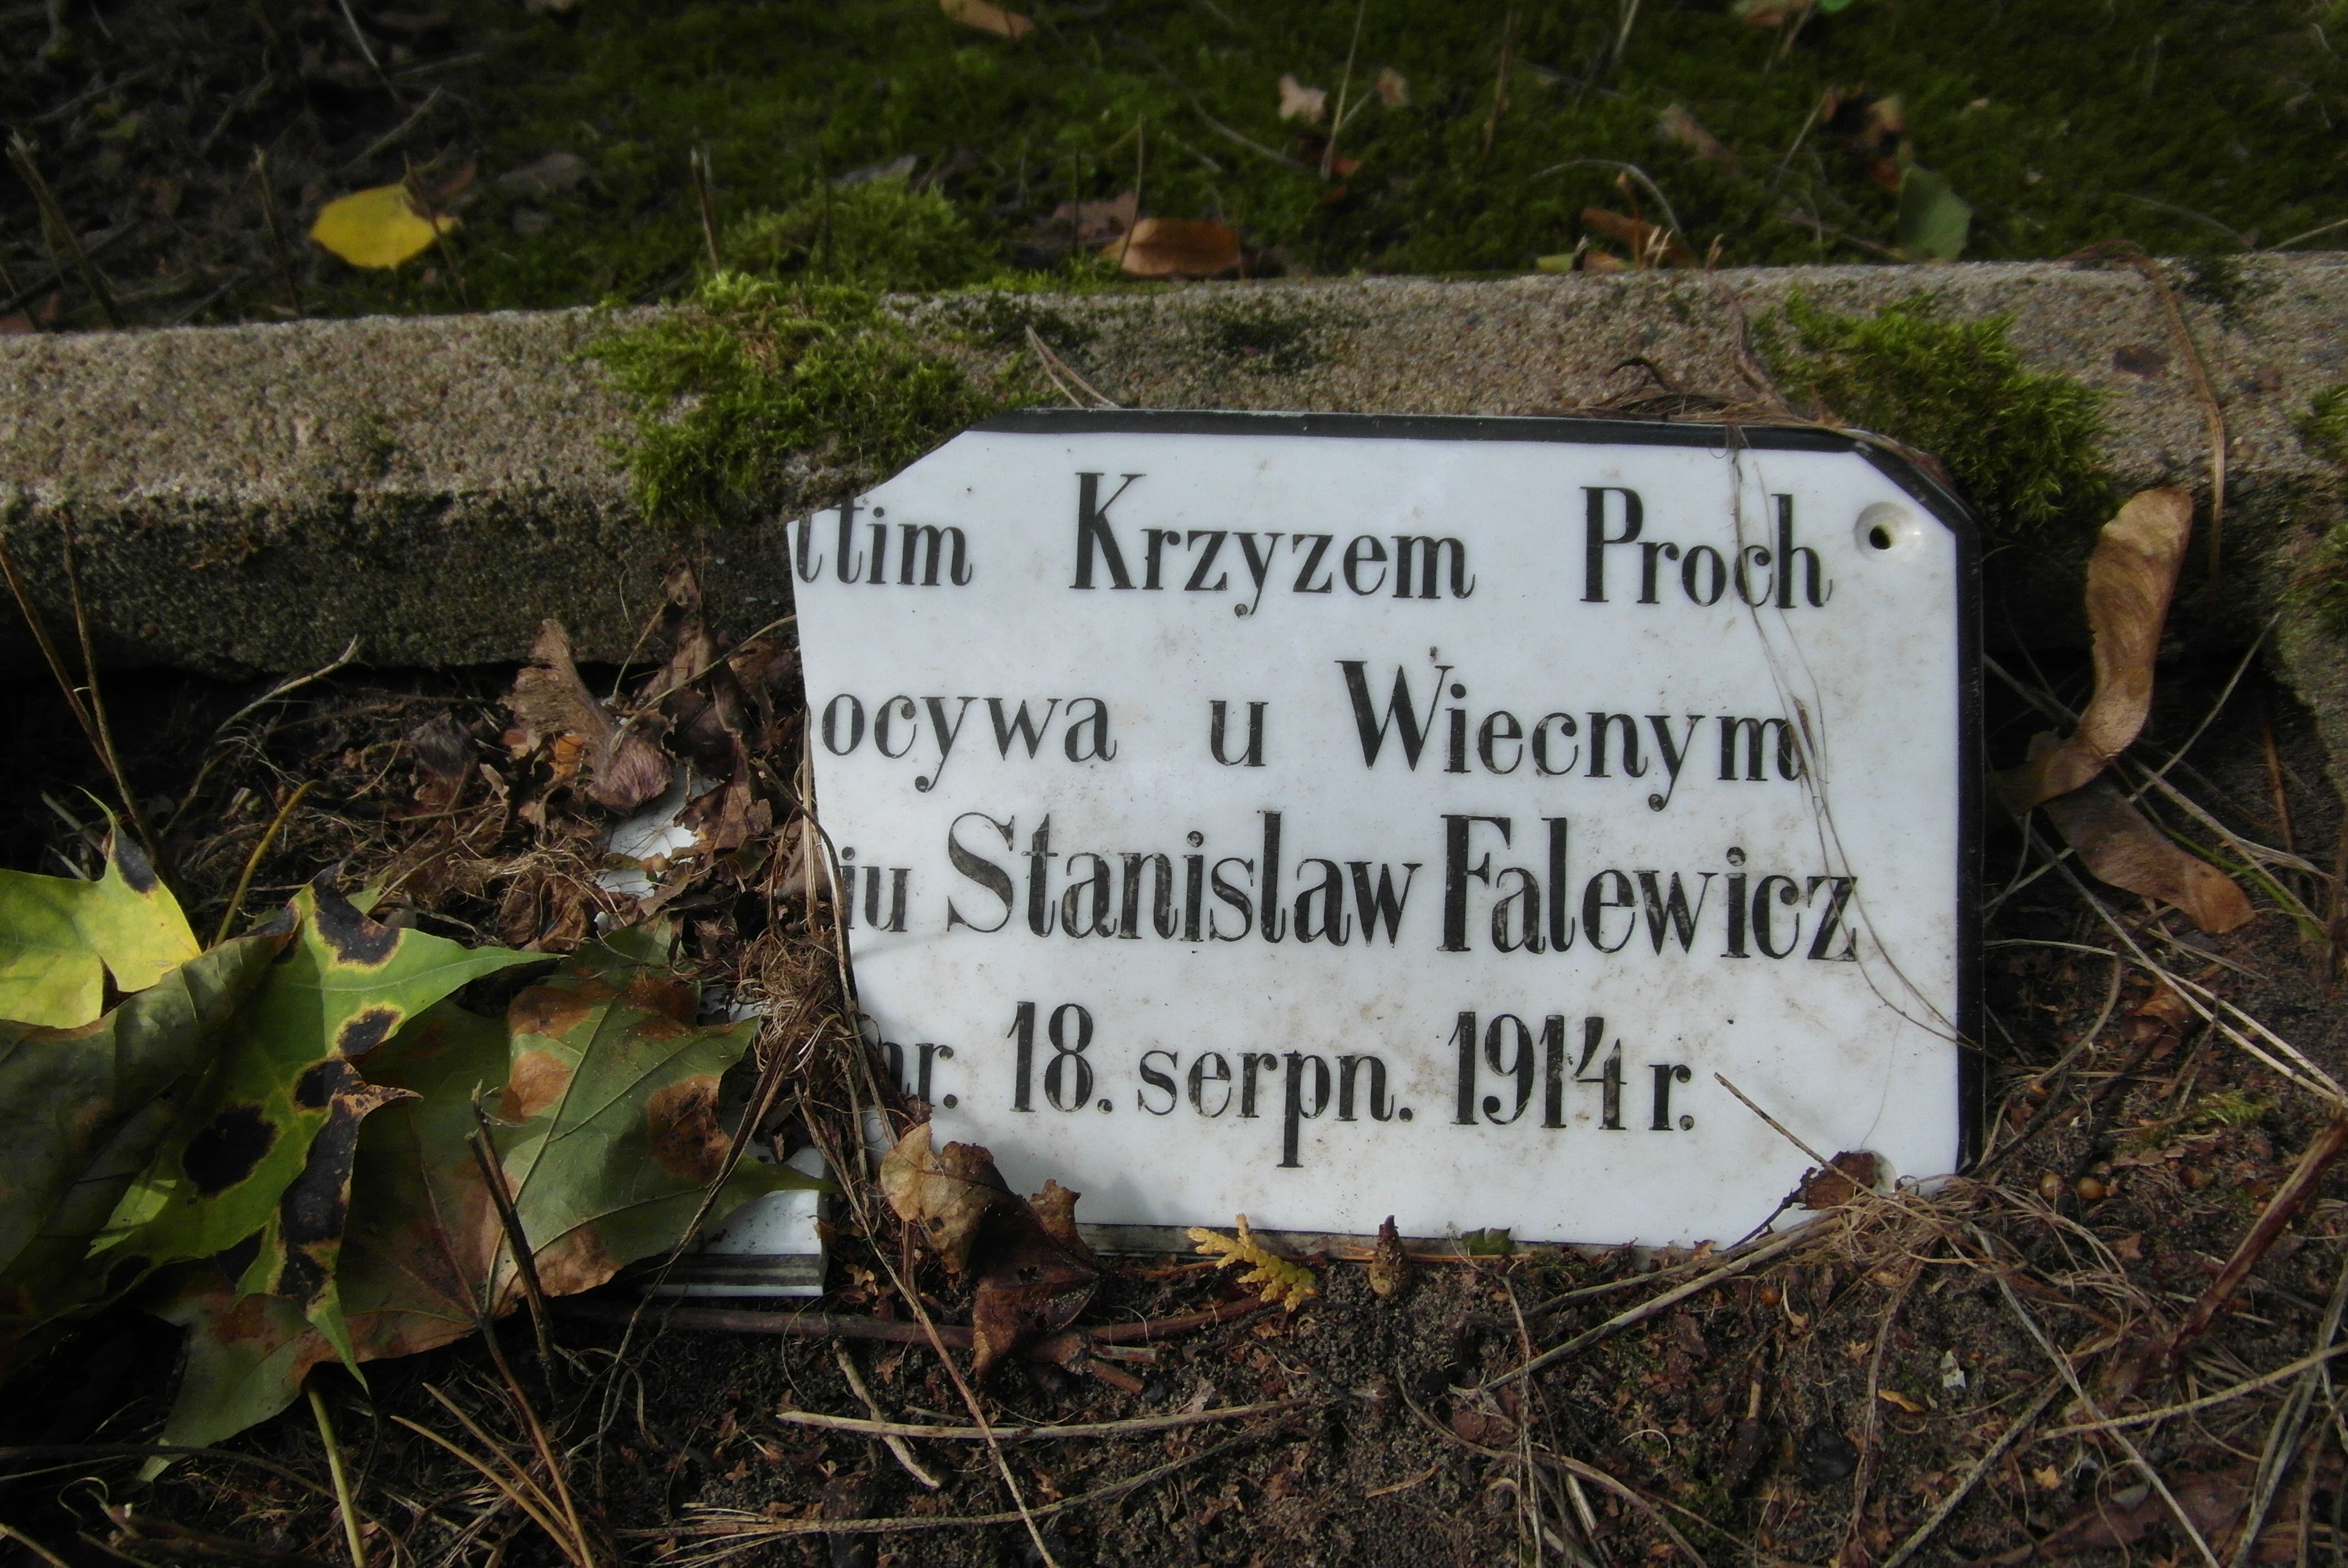 Inscription from the gravestone of Stanislav Falewicz, St Michael's cemetery in Riga, as of 2021.